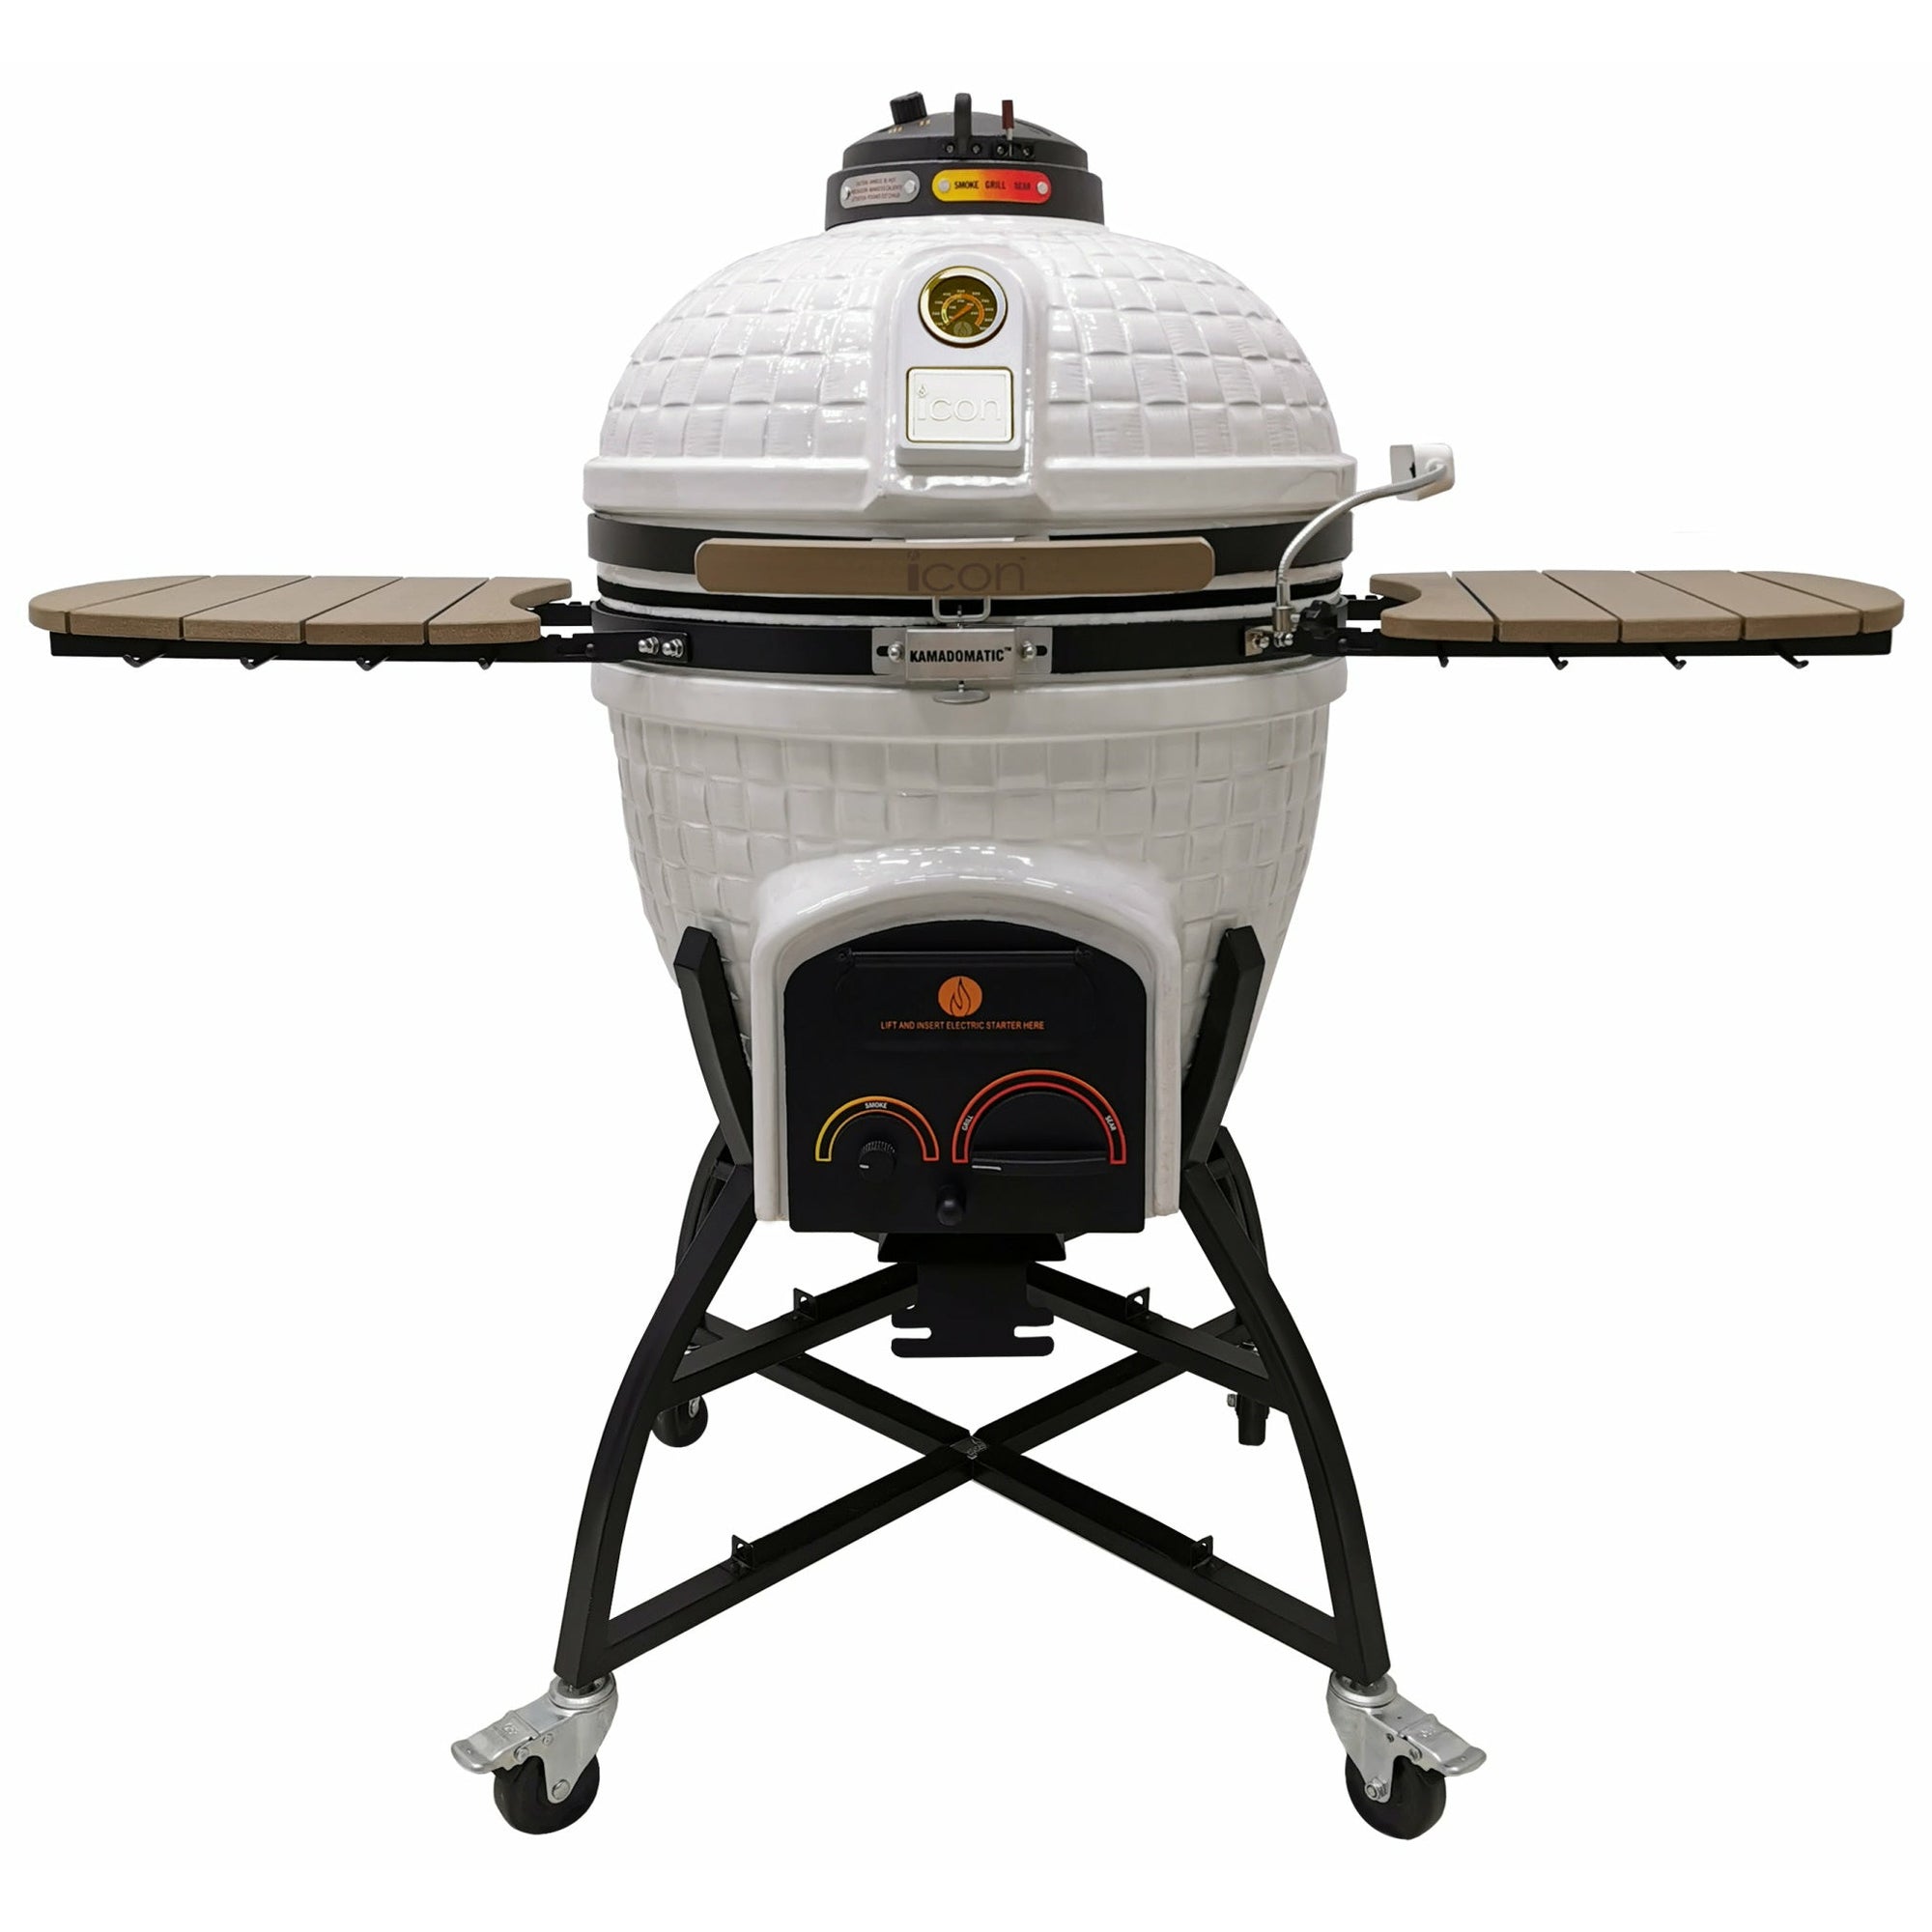 Icon XR402 Deluxe Kamado grill white - Color Coded Cast Iron Vent top Vent with smoker knob, cast iron and stainless steel cooking Grids, Easy lift Kamadomatic hinge, upgraded felt & Locking latch Wood sculpted thermoplastic side shelves with accessory hooks, electric starter port , electric starter holster, removable ash tray, extra wide storage cart with 3" caster wheels in a white background